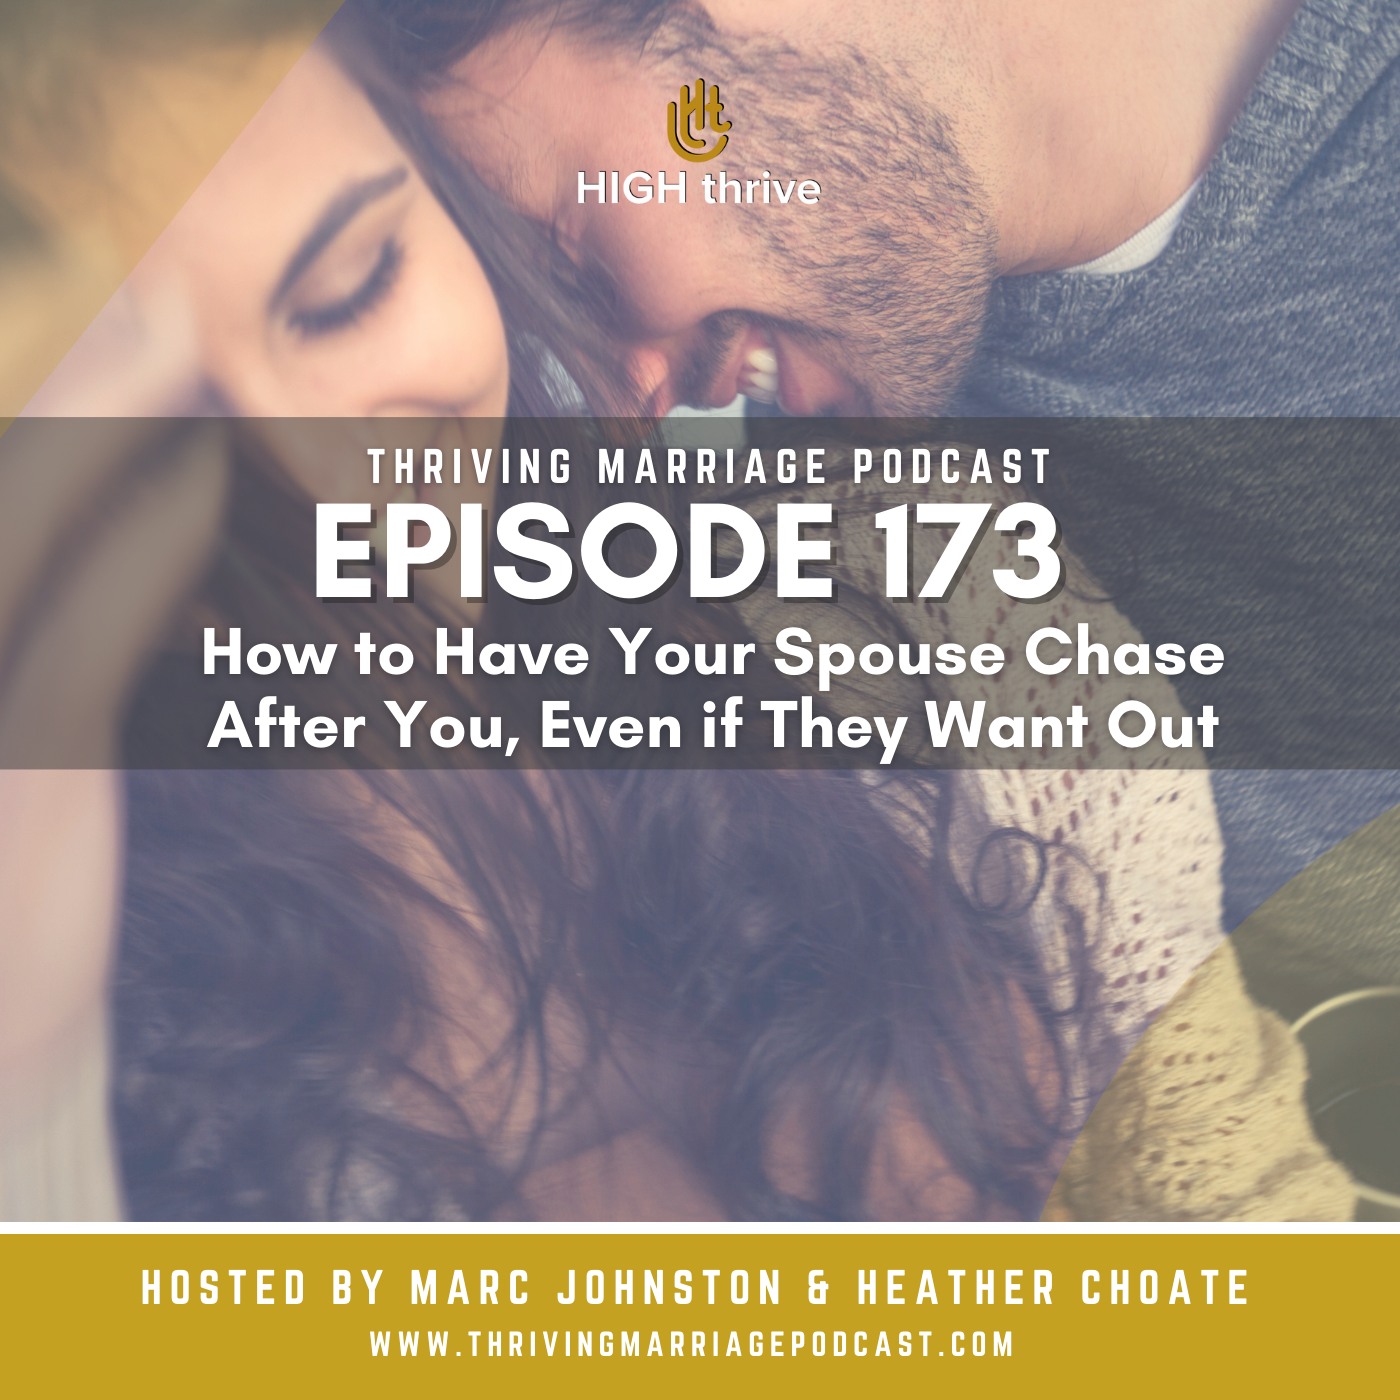 Episode 173: How to Have Your Spouse Chase After You, Even if They Want Out